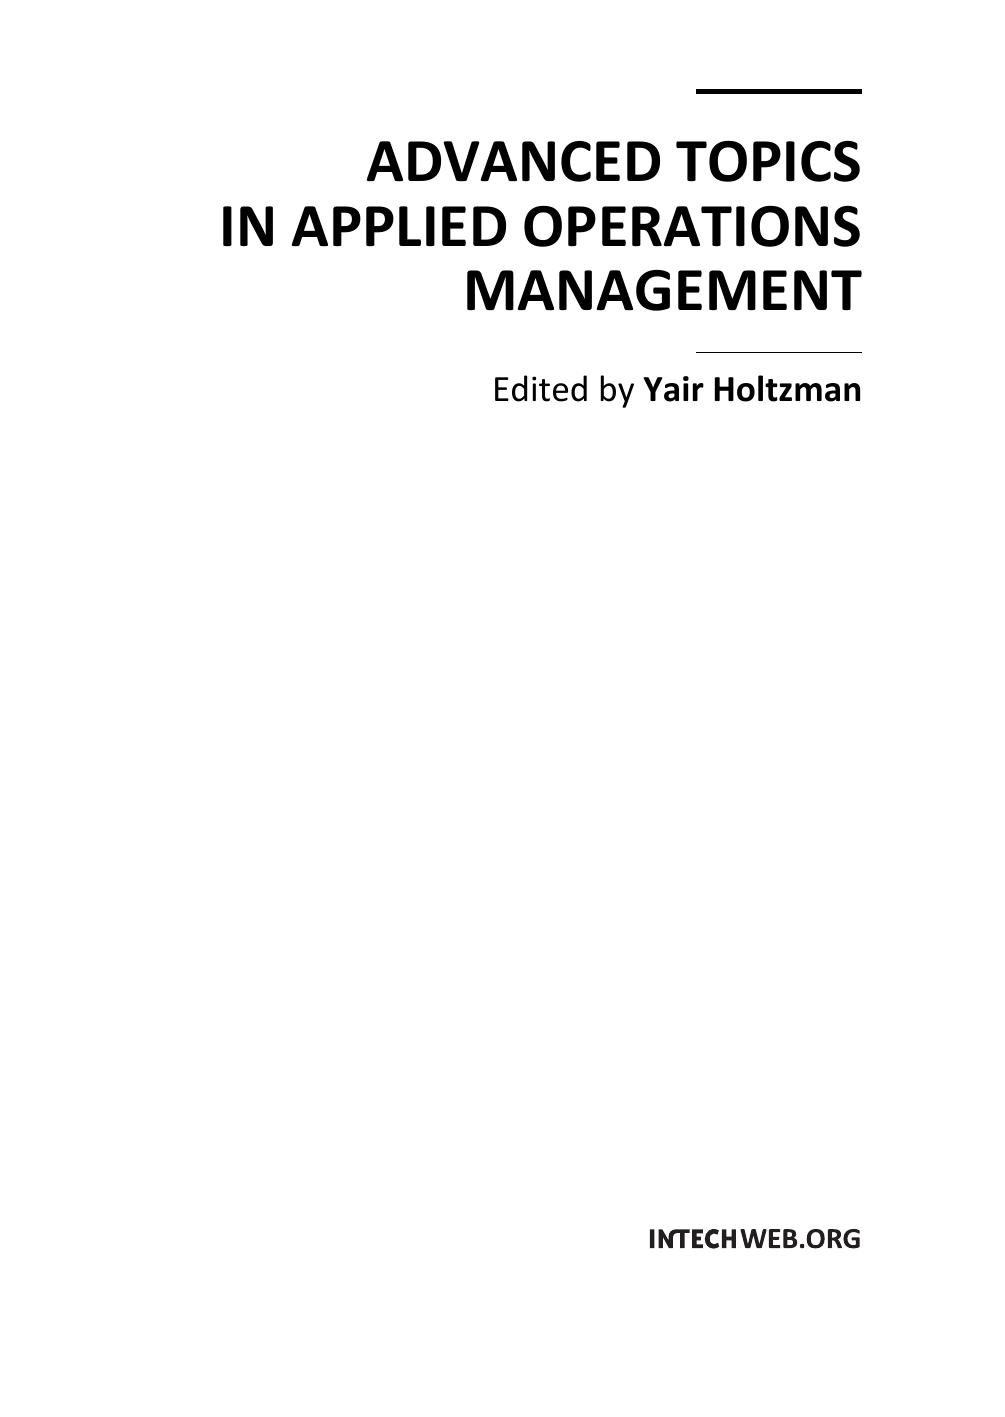 Advanced Topics in Applied Operations Management 2012.pdf